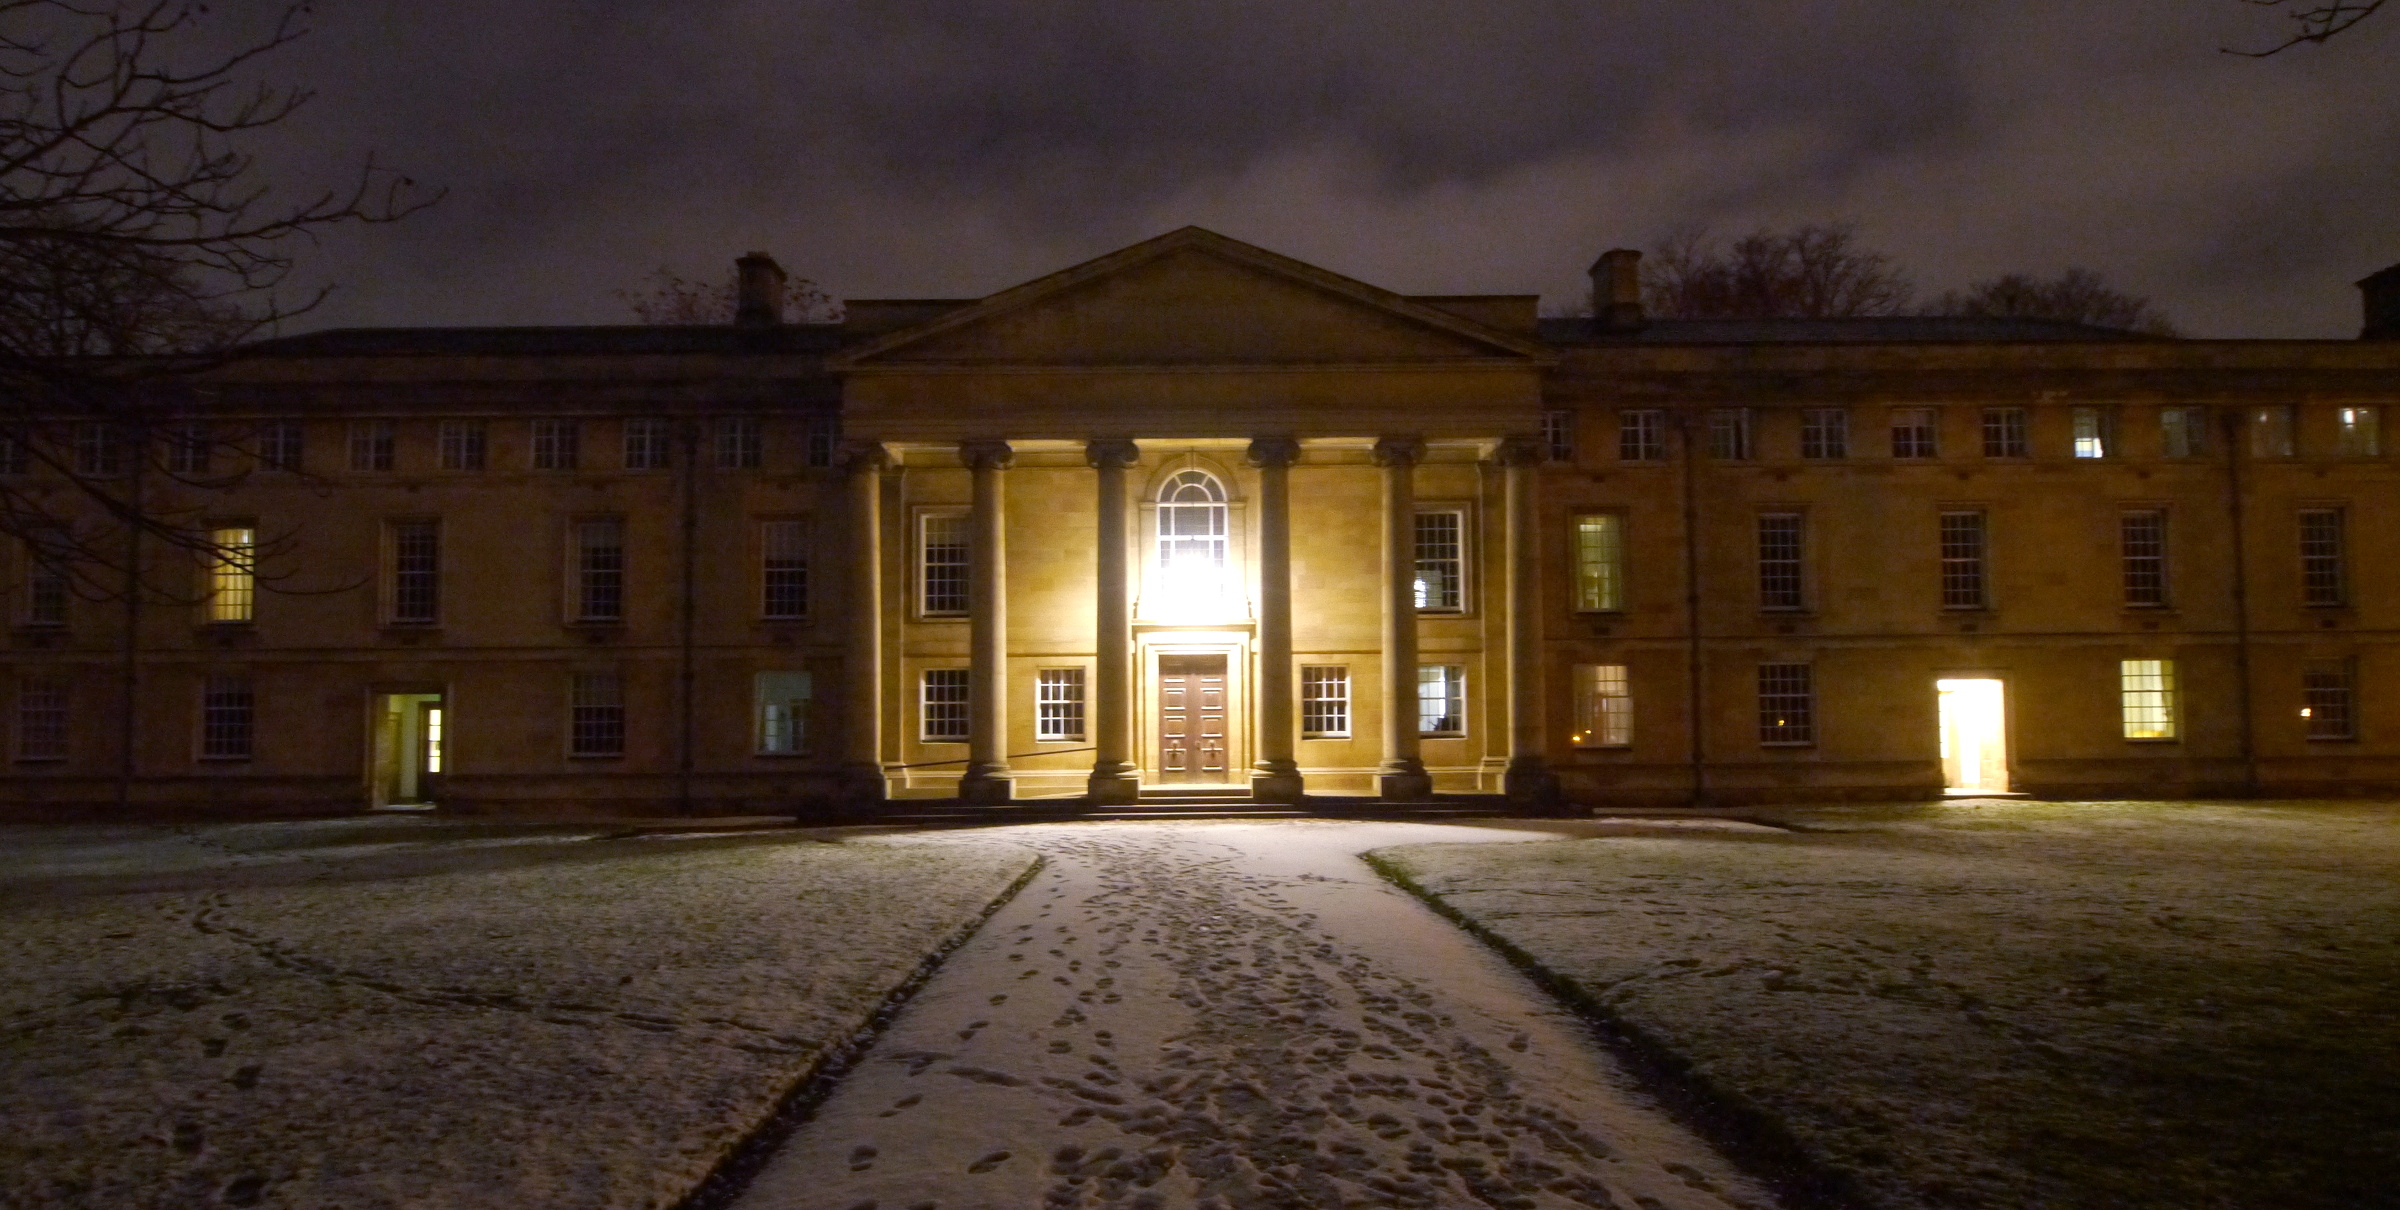 Downing College in Cambridge after a snow 'storm'